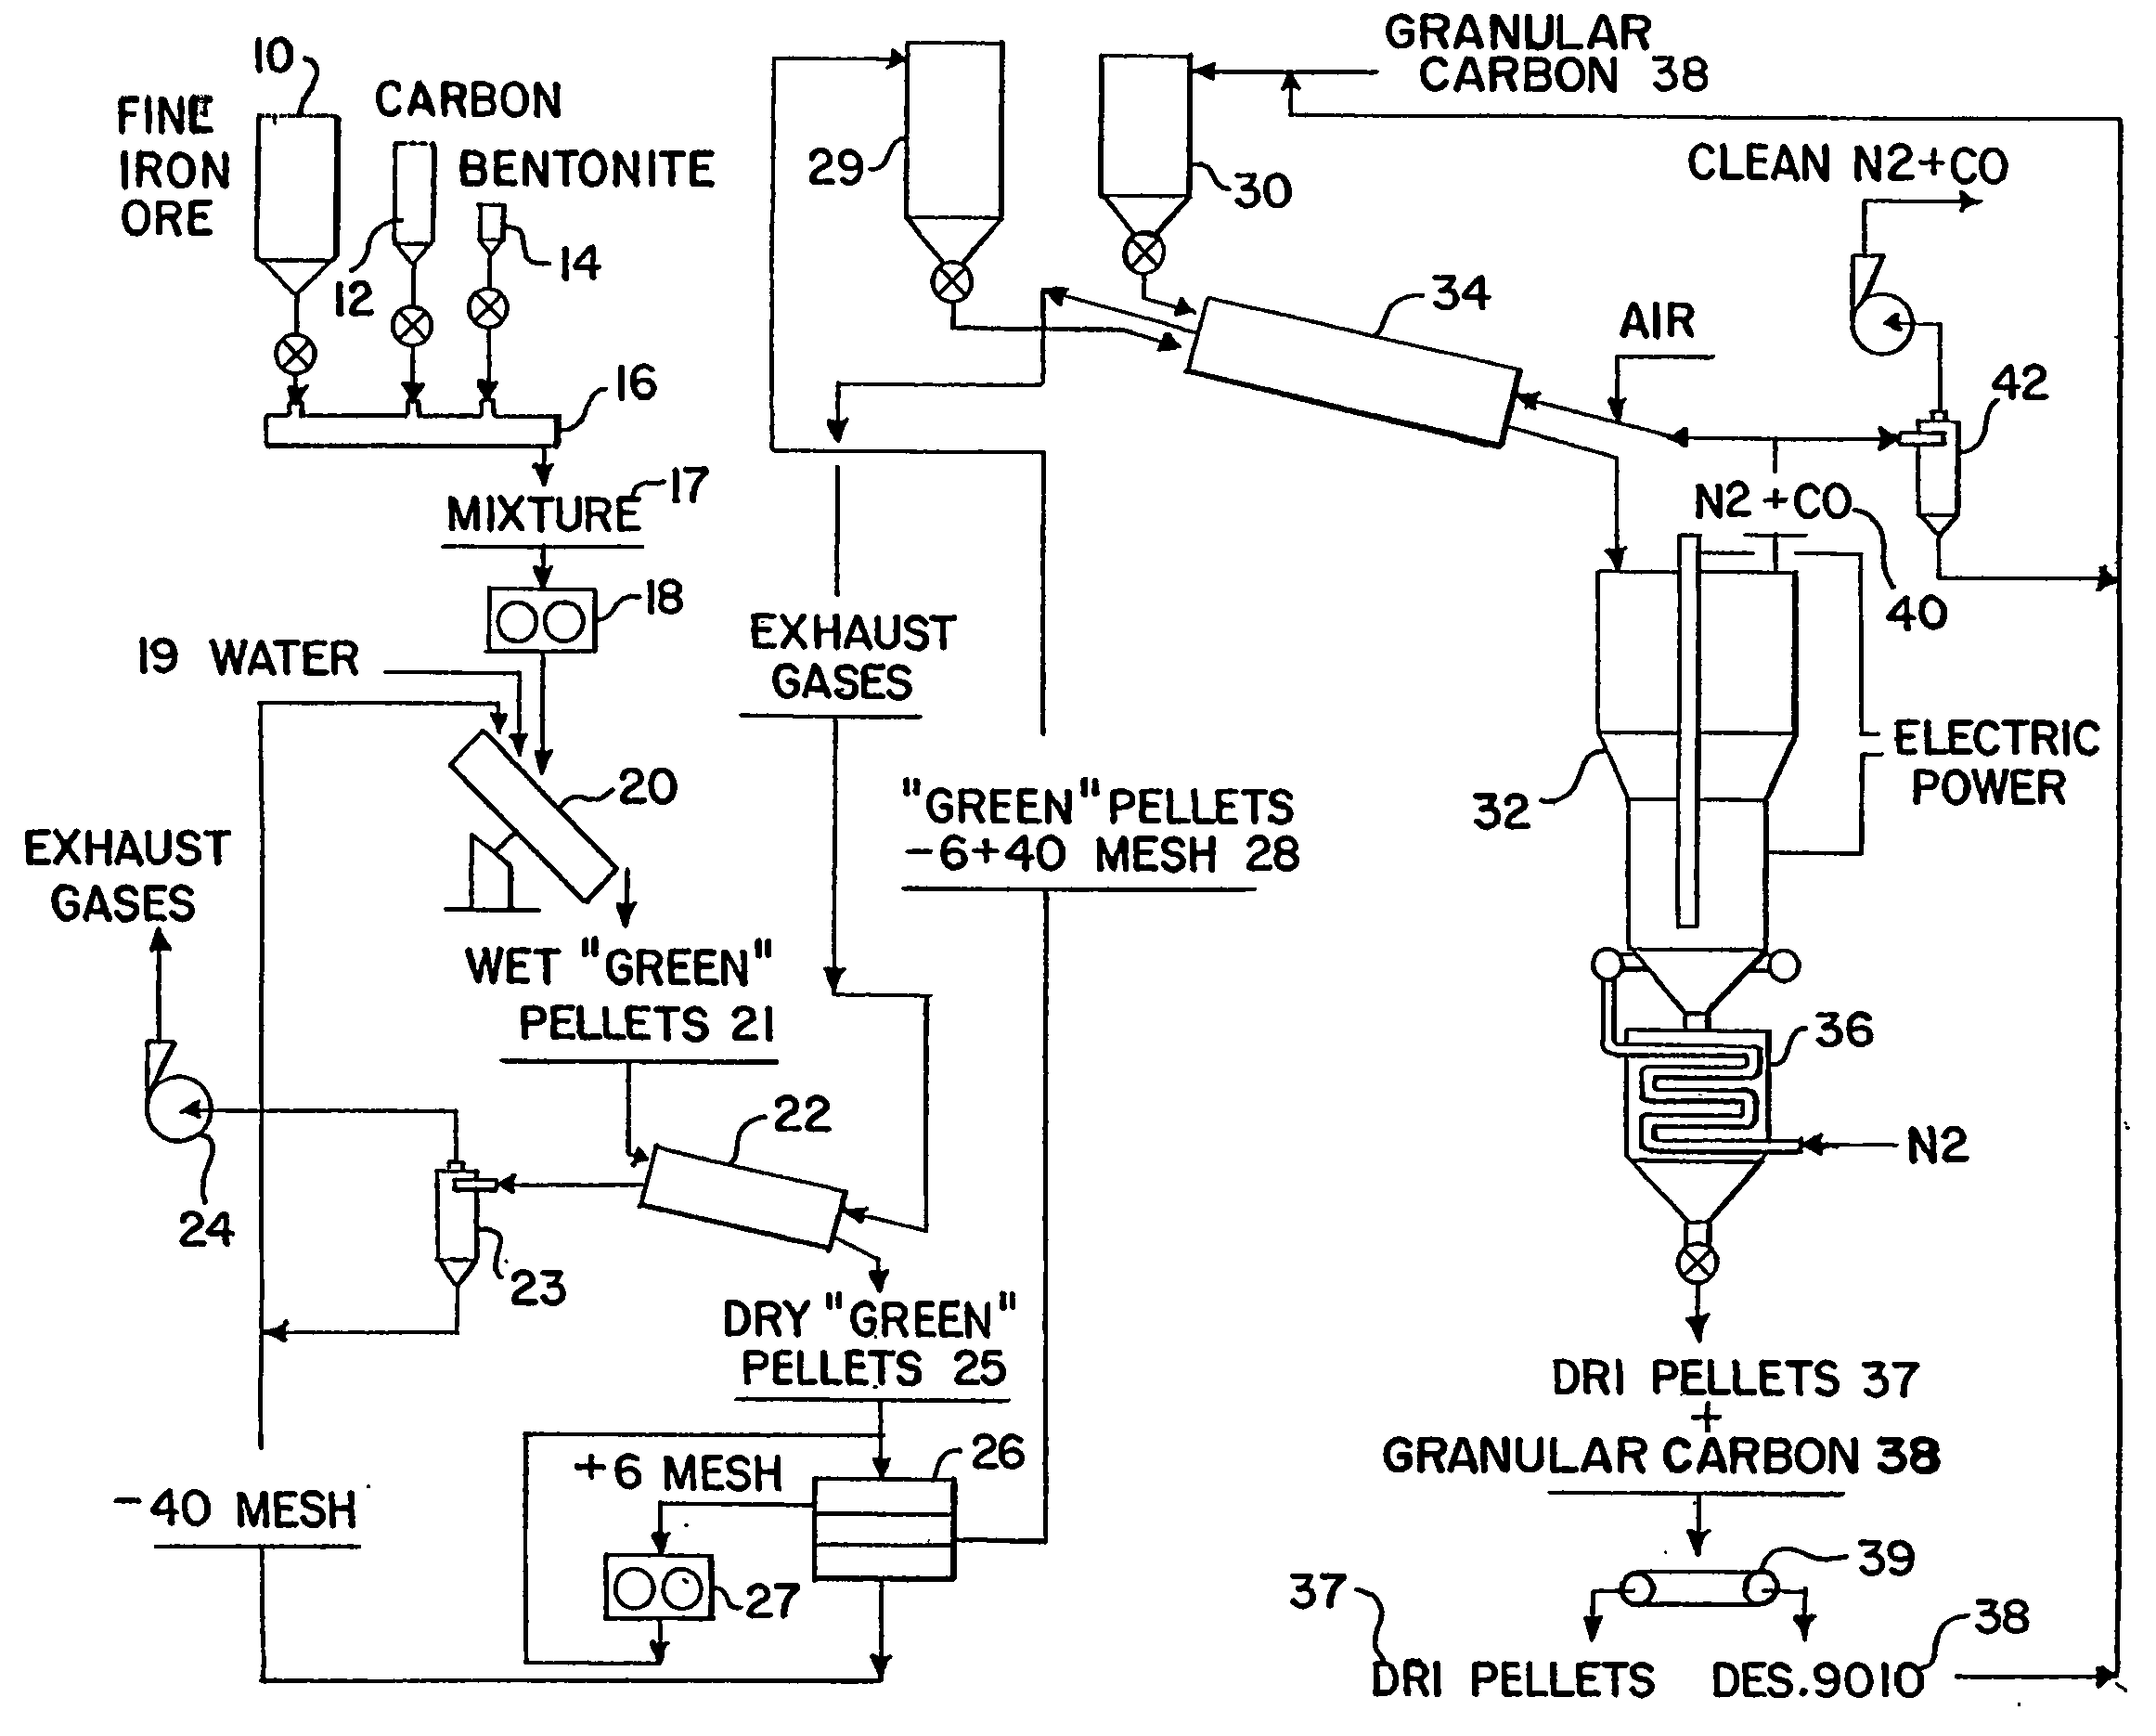 Process and apparatus for the direct reduction of iron oxides in an electrothermal fluidized bed and resultant product